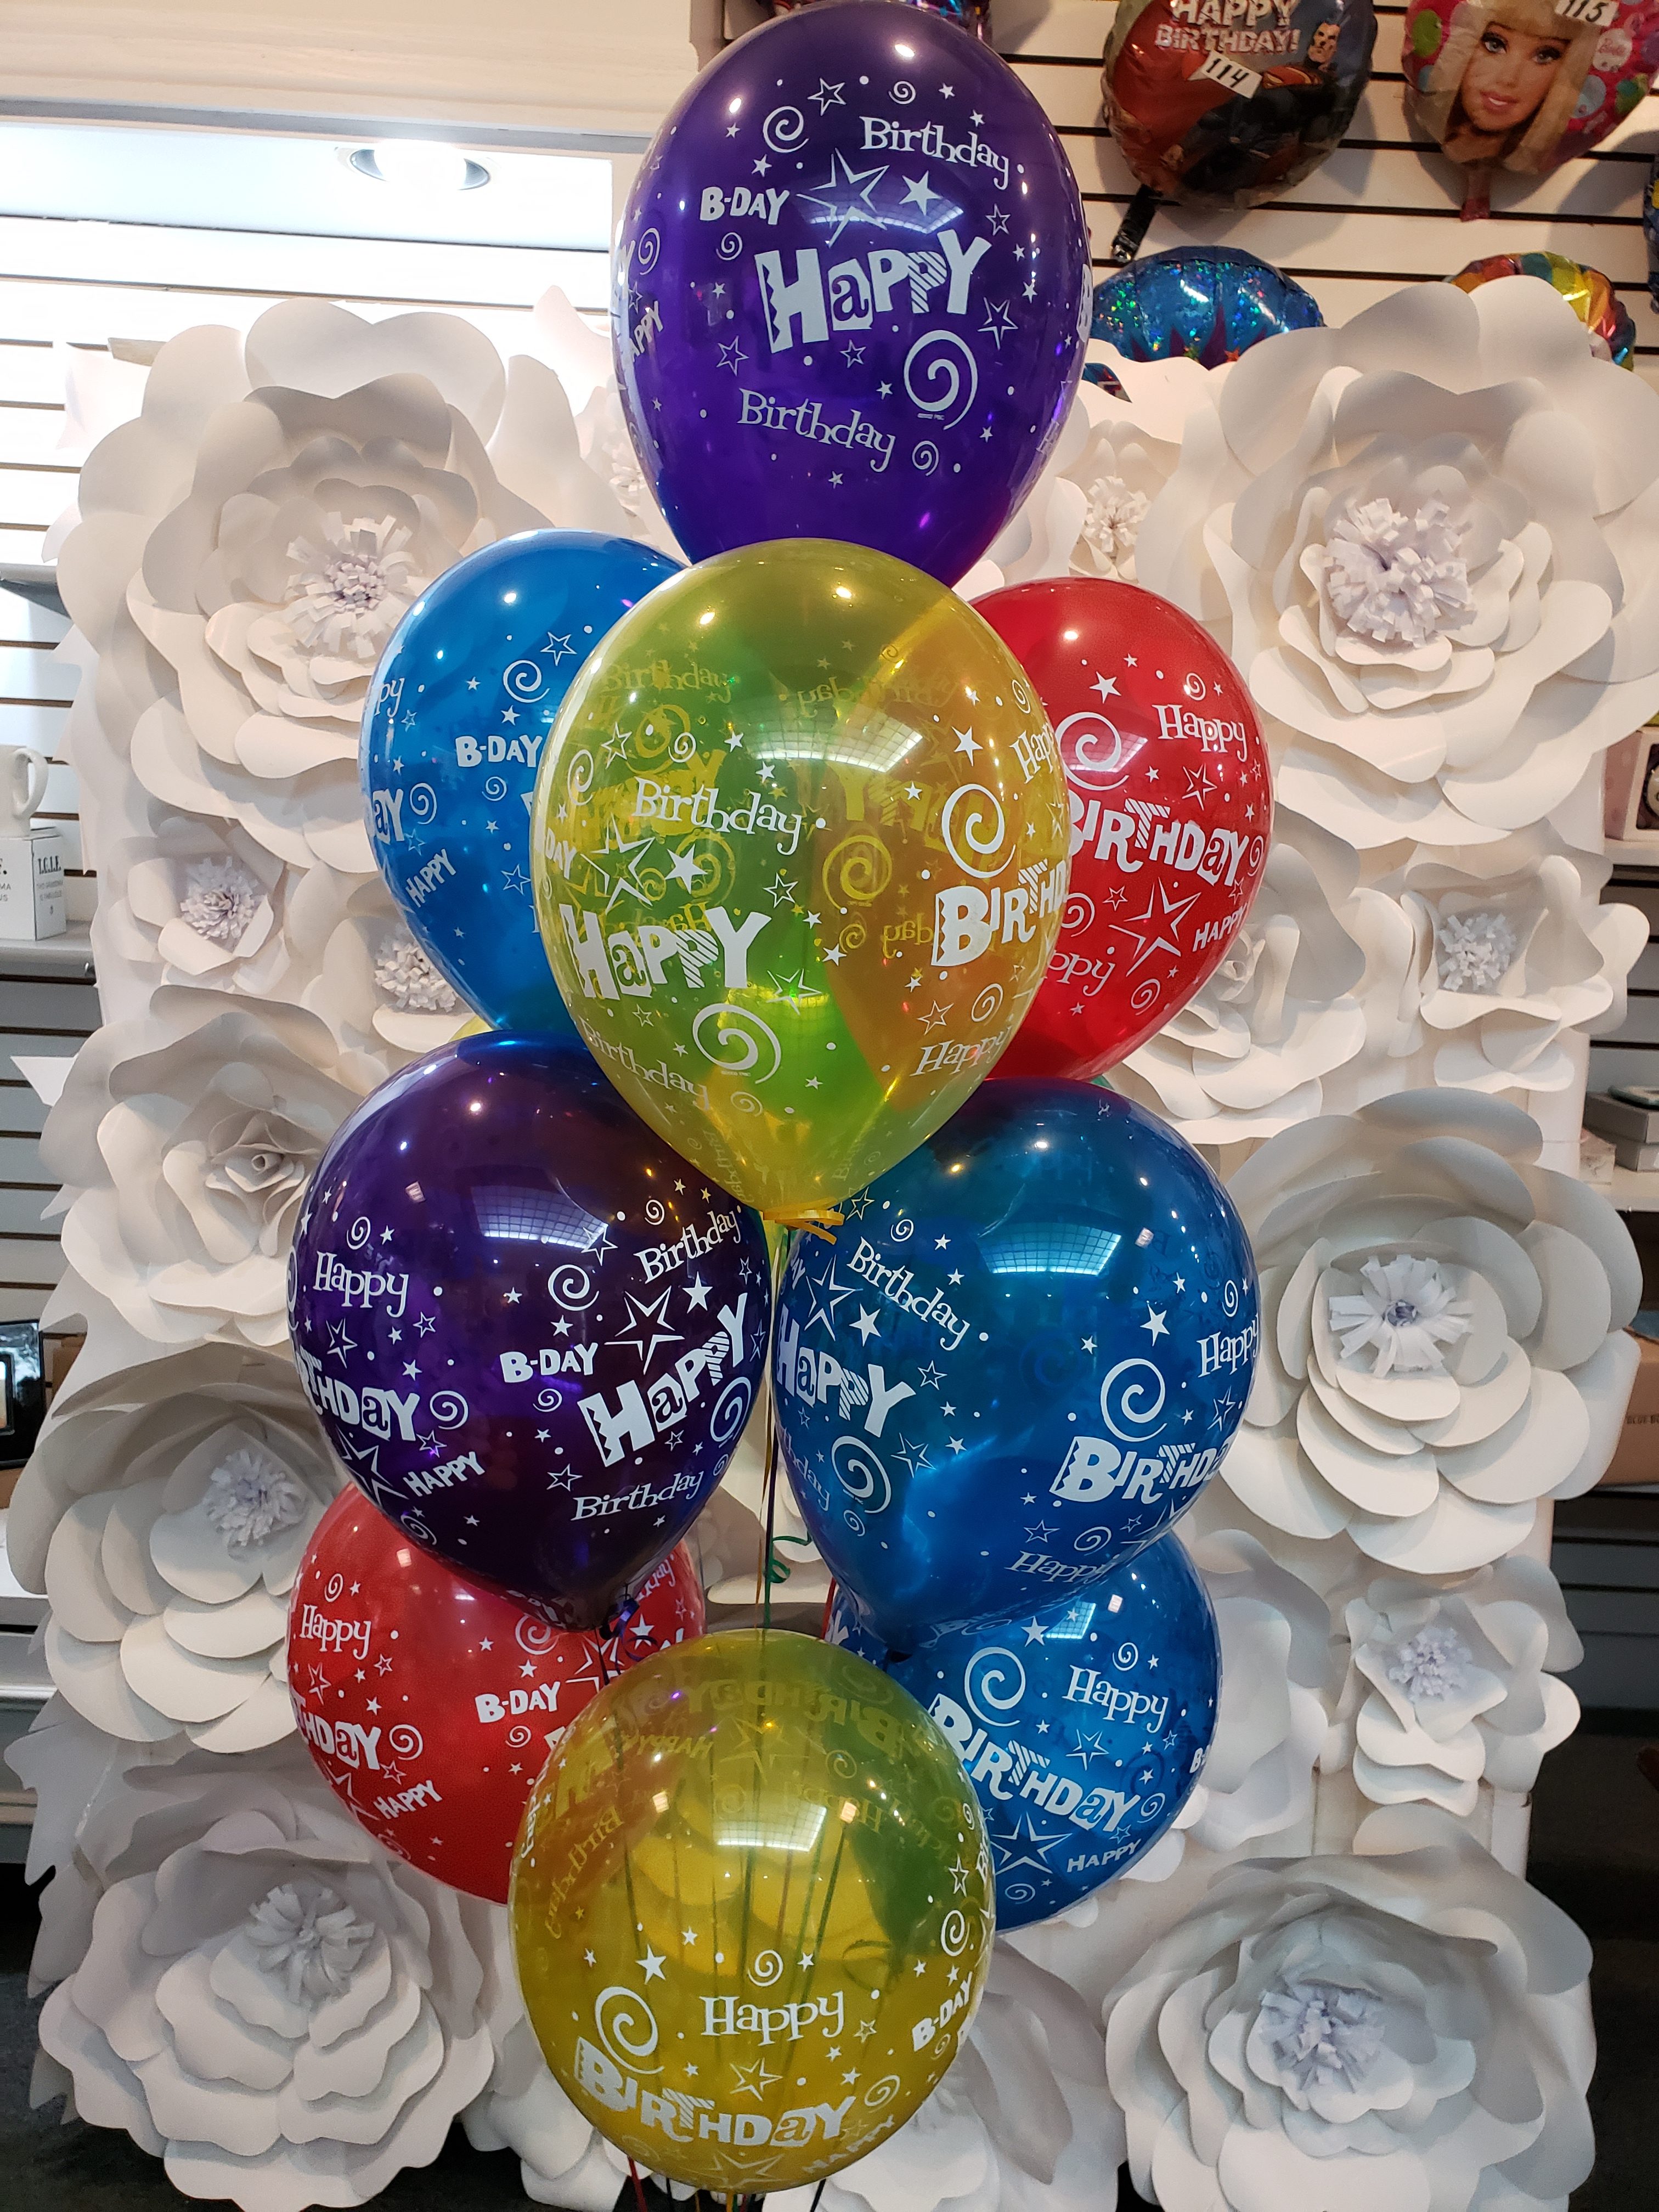 HAPPY BIRTHDAY BRIGHT BALLOON LATEX BOUQUET Delivery Near Me